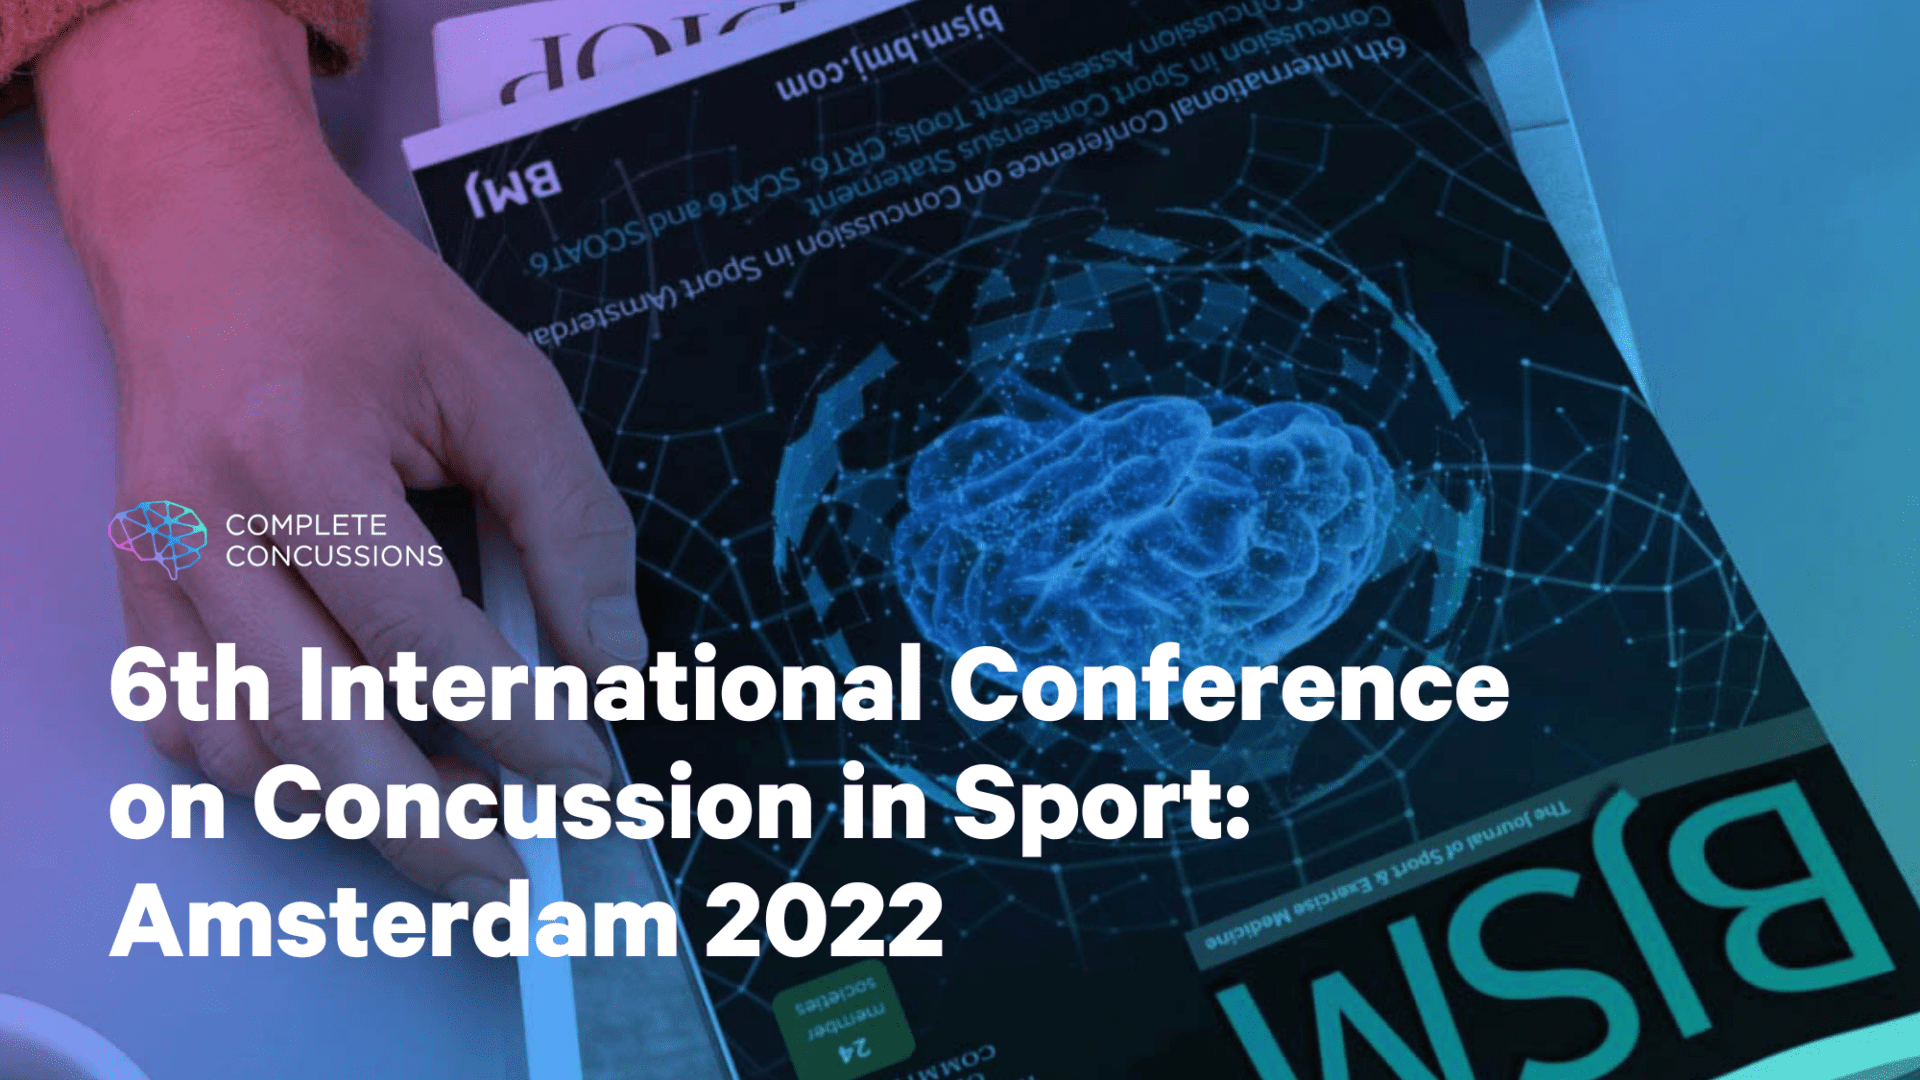 6th International Conference on Concussion in Sport: Amsterdam 2022